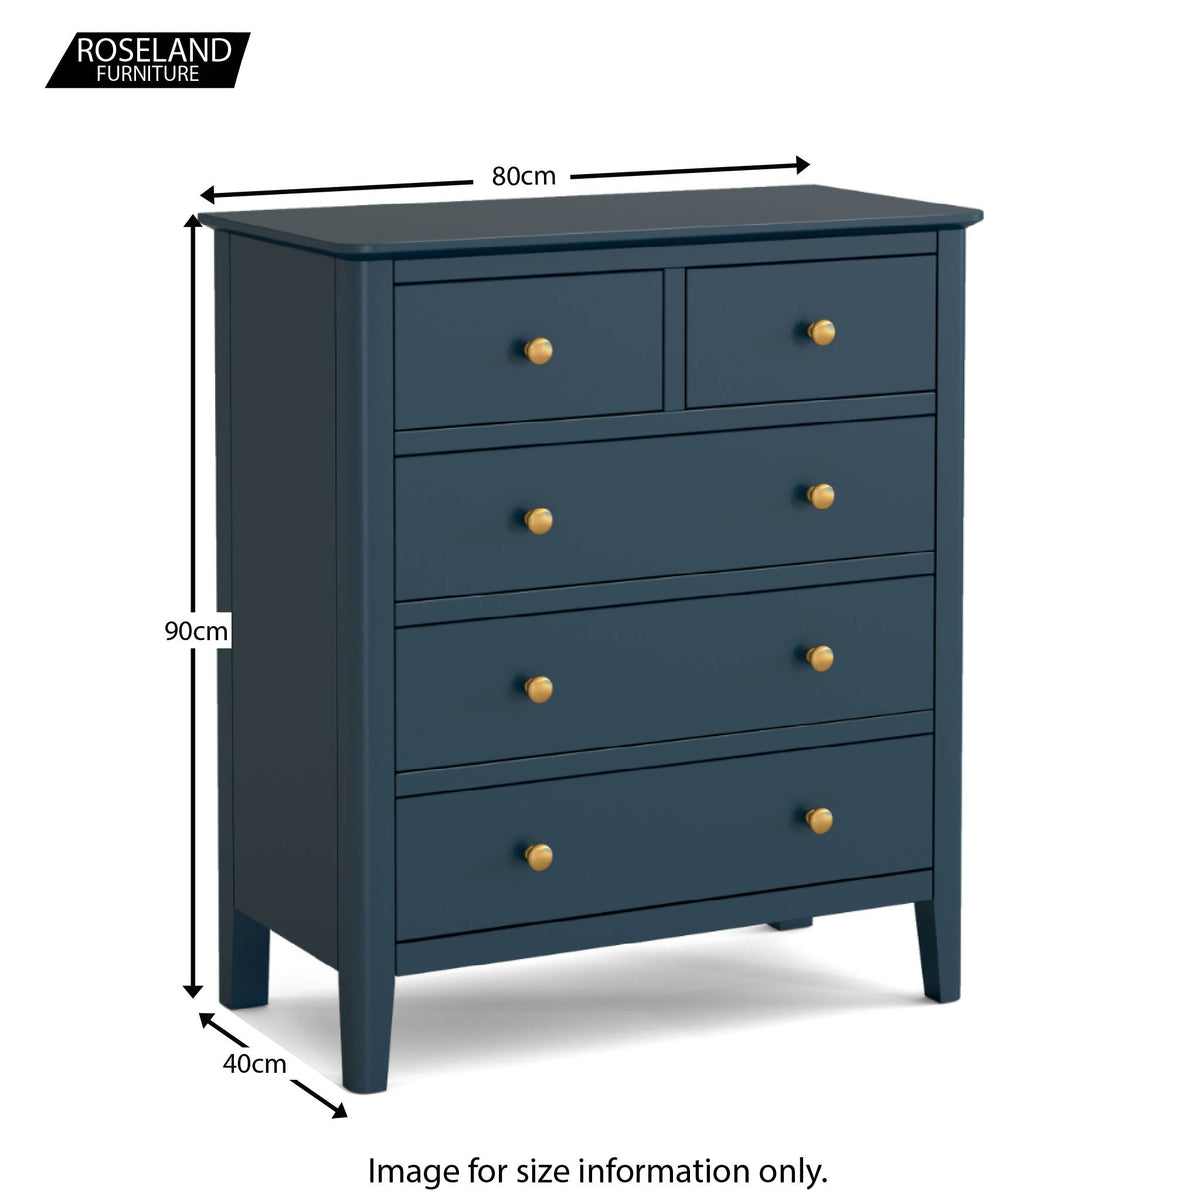 Stirling Blue 2 over 3 Chest of Drawers - Size Guide